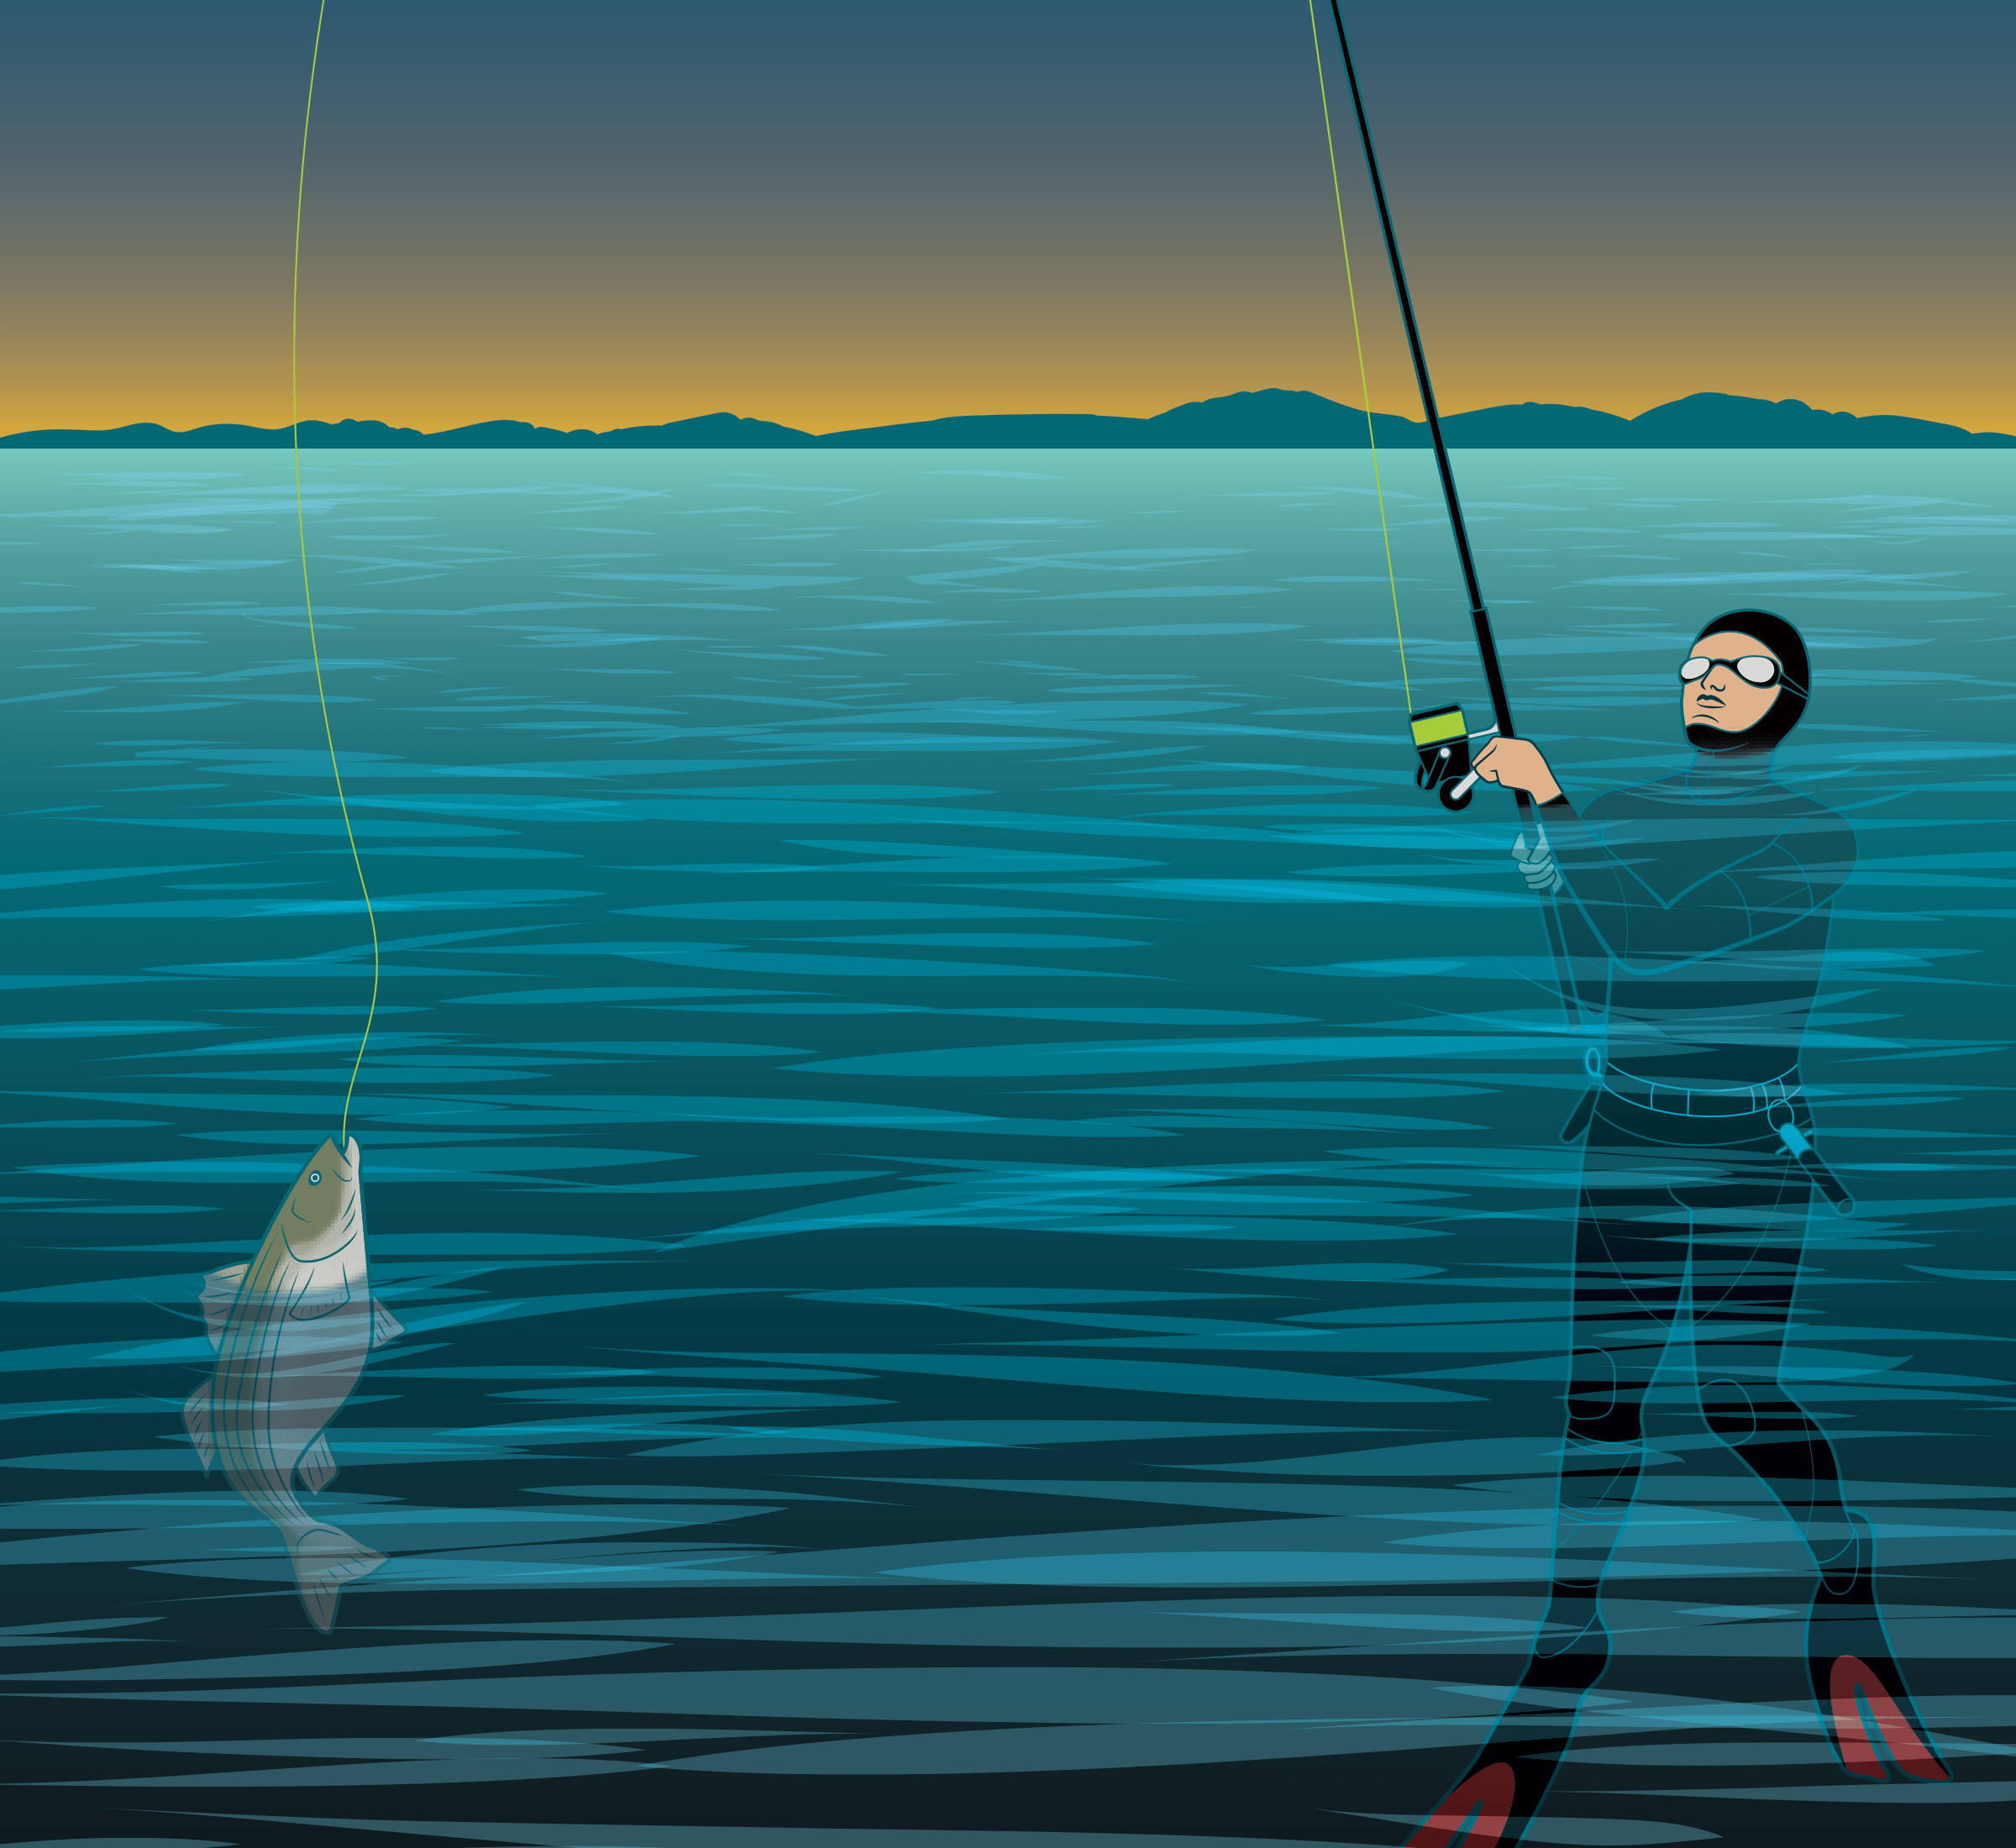 Skishing: Taking on Deep Water and Big Fish in a Wetsuit